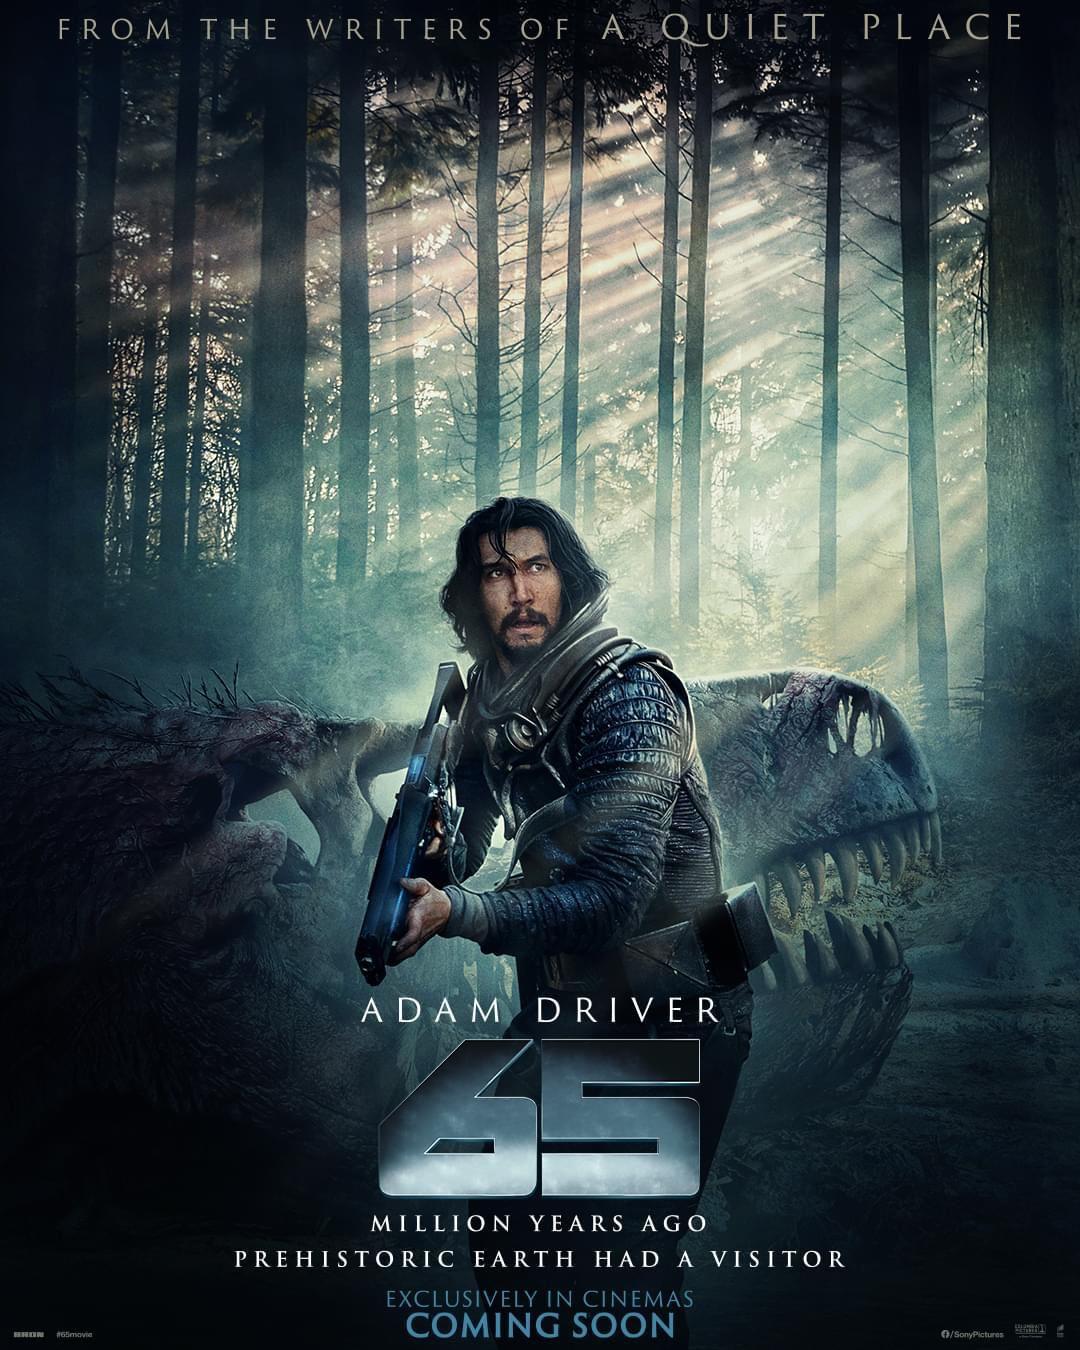 Adam Driver fights dinosaurs in prehistoric times in action-packed trailer of 65